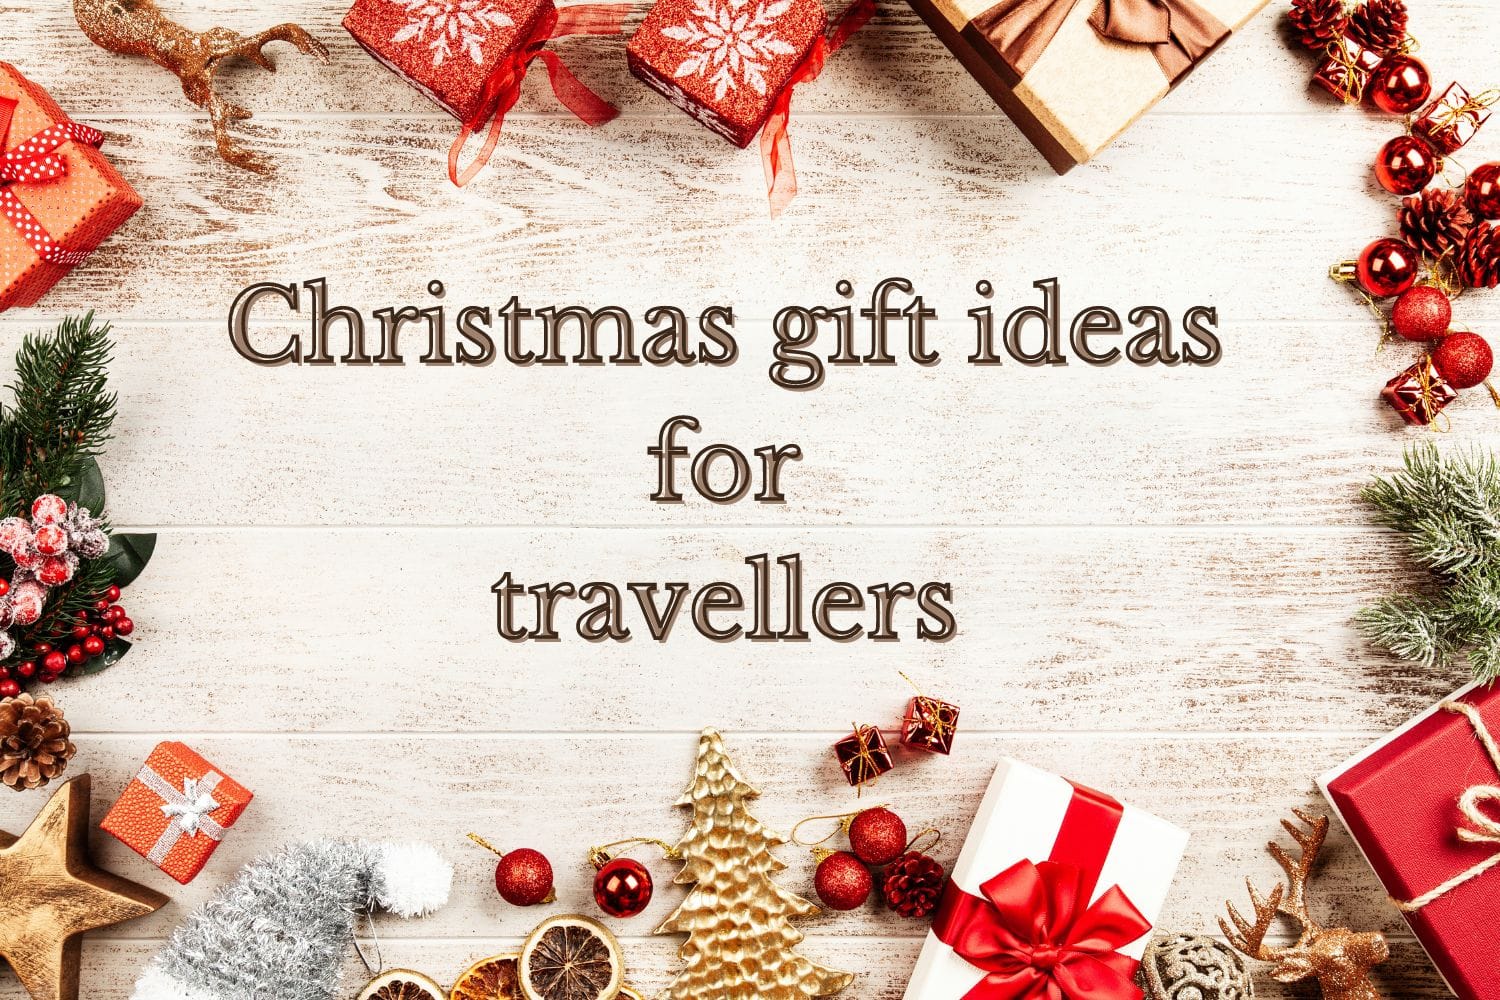 Christmas gift ideas for travellers